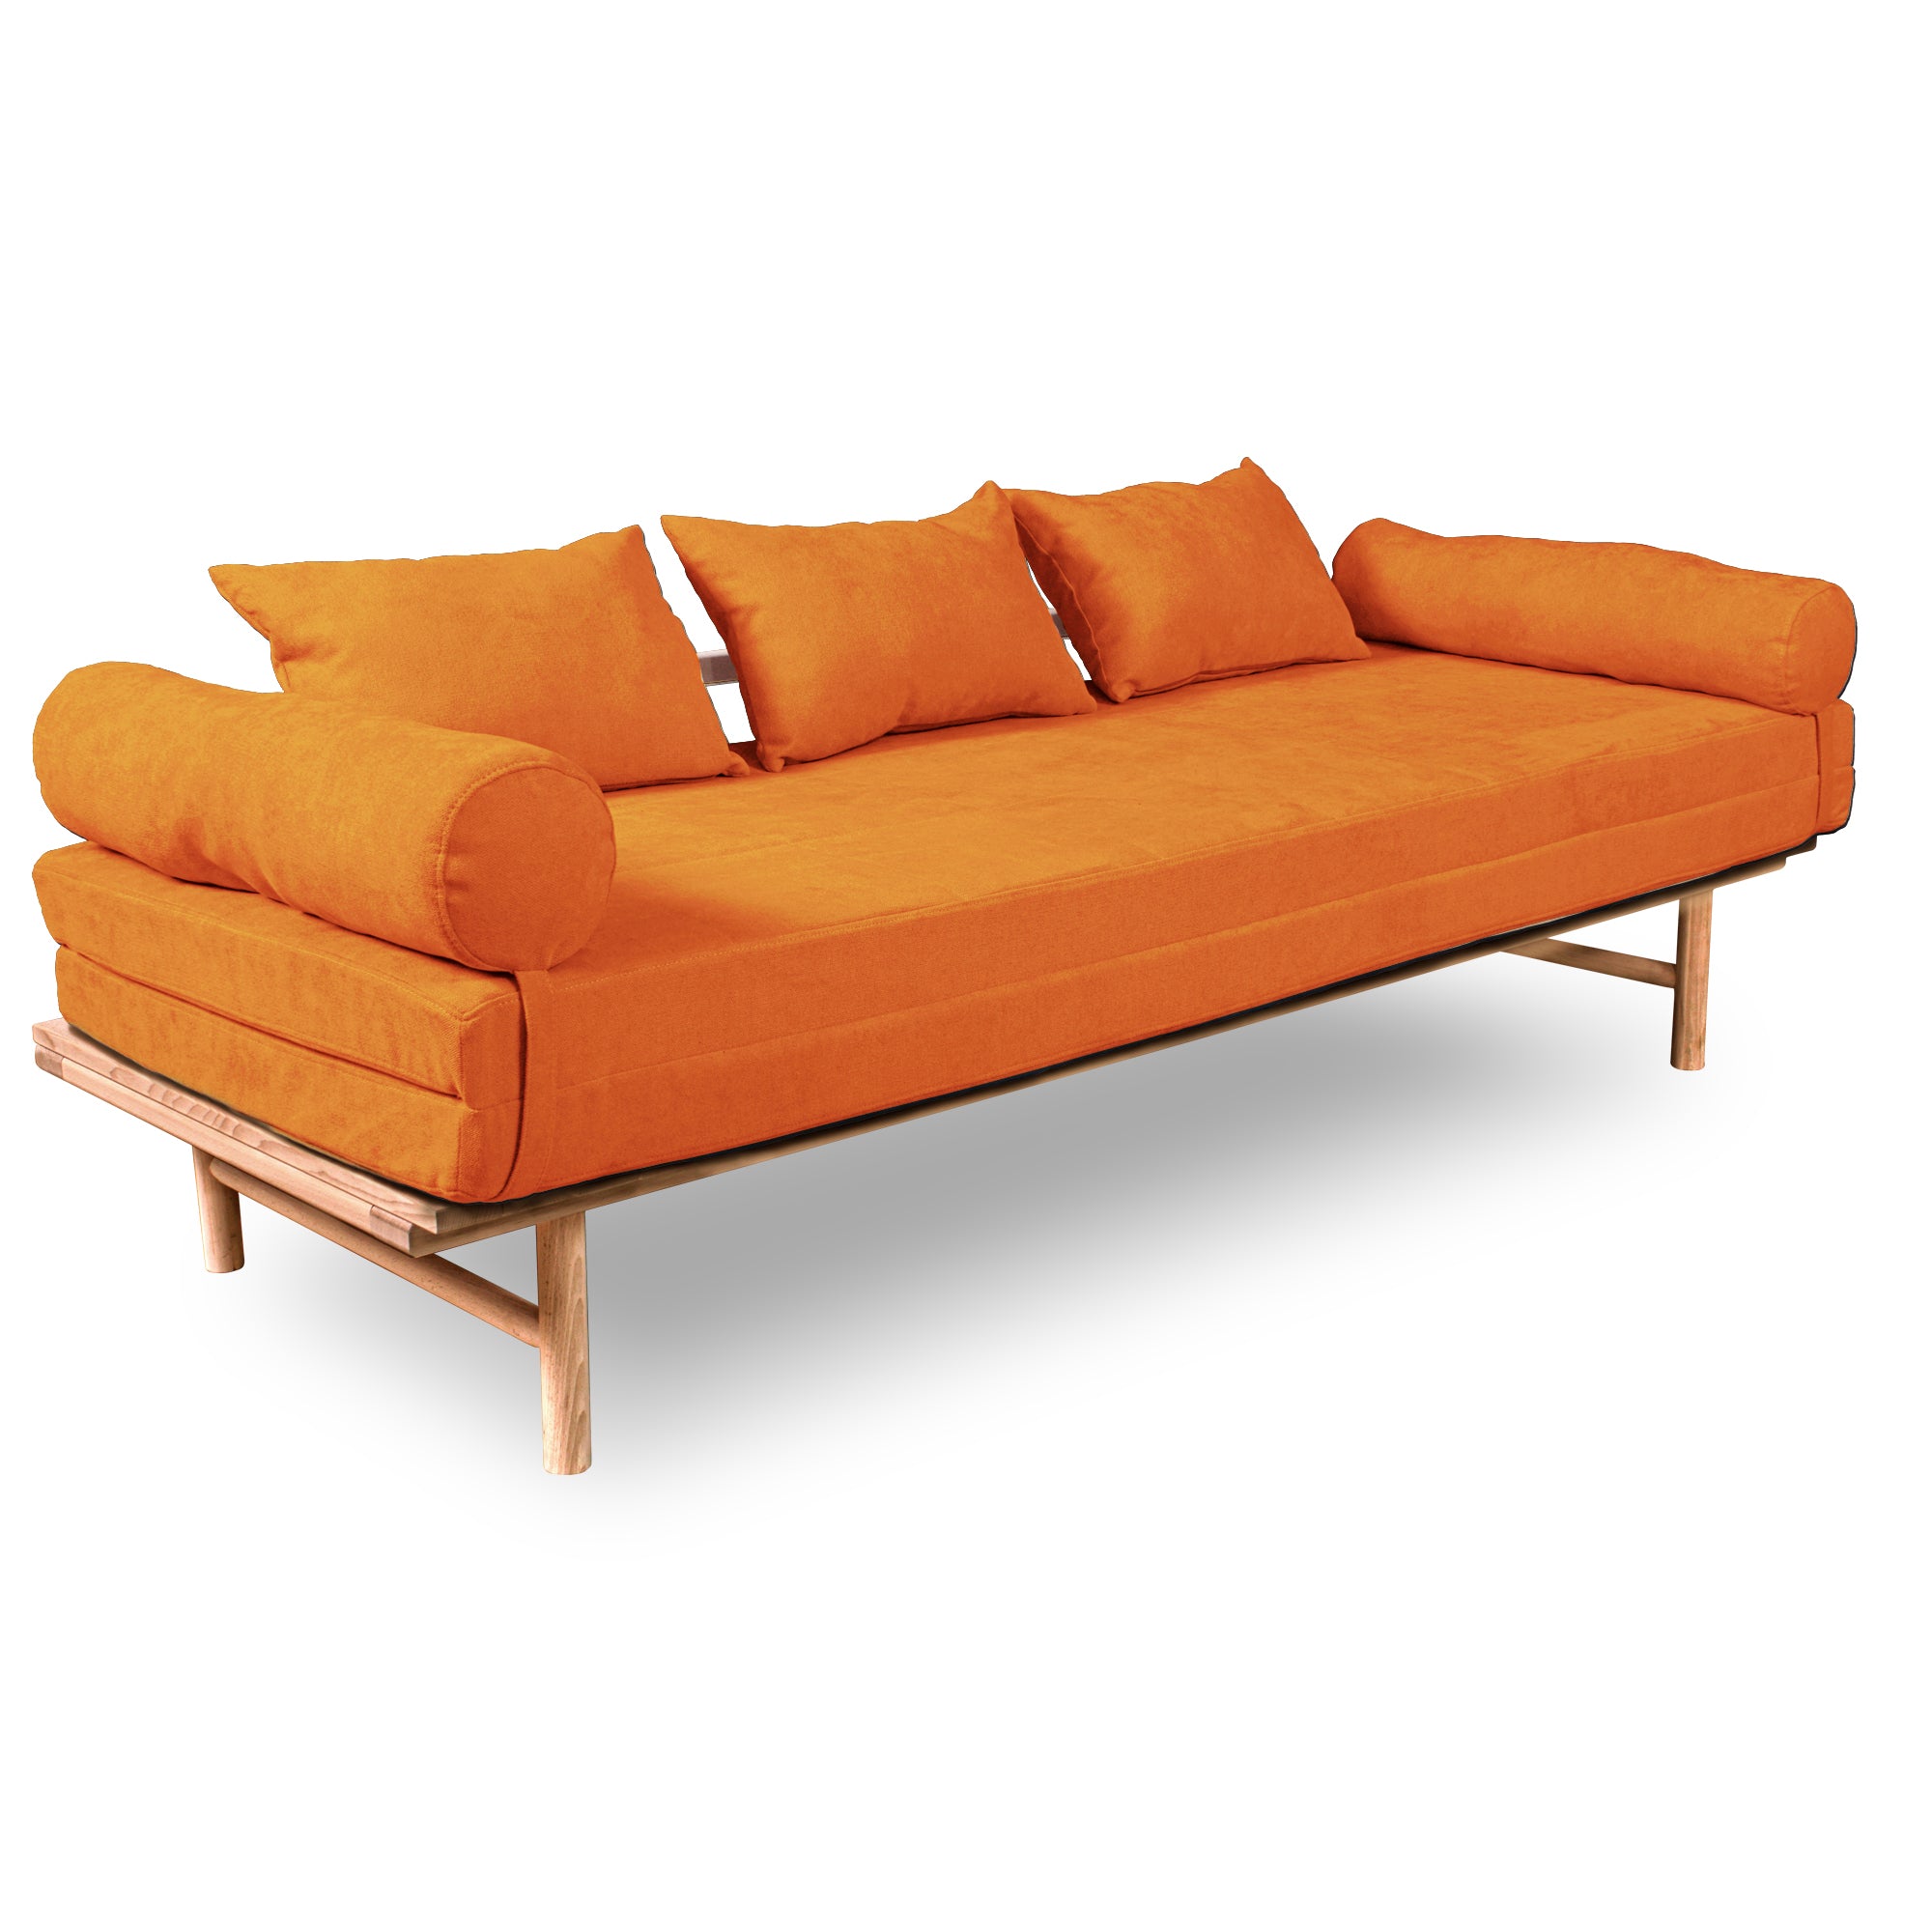 Le MAR Folding Daybed, Beech Wood Frame, Natural Colour-upholstery orange